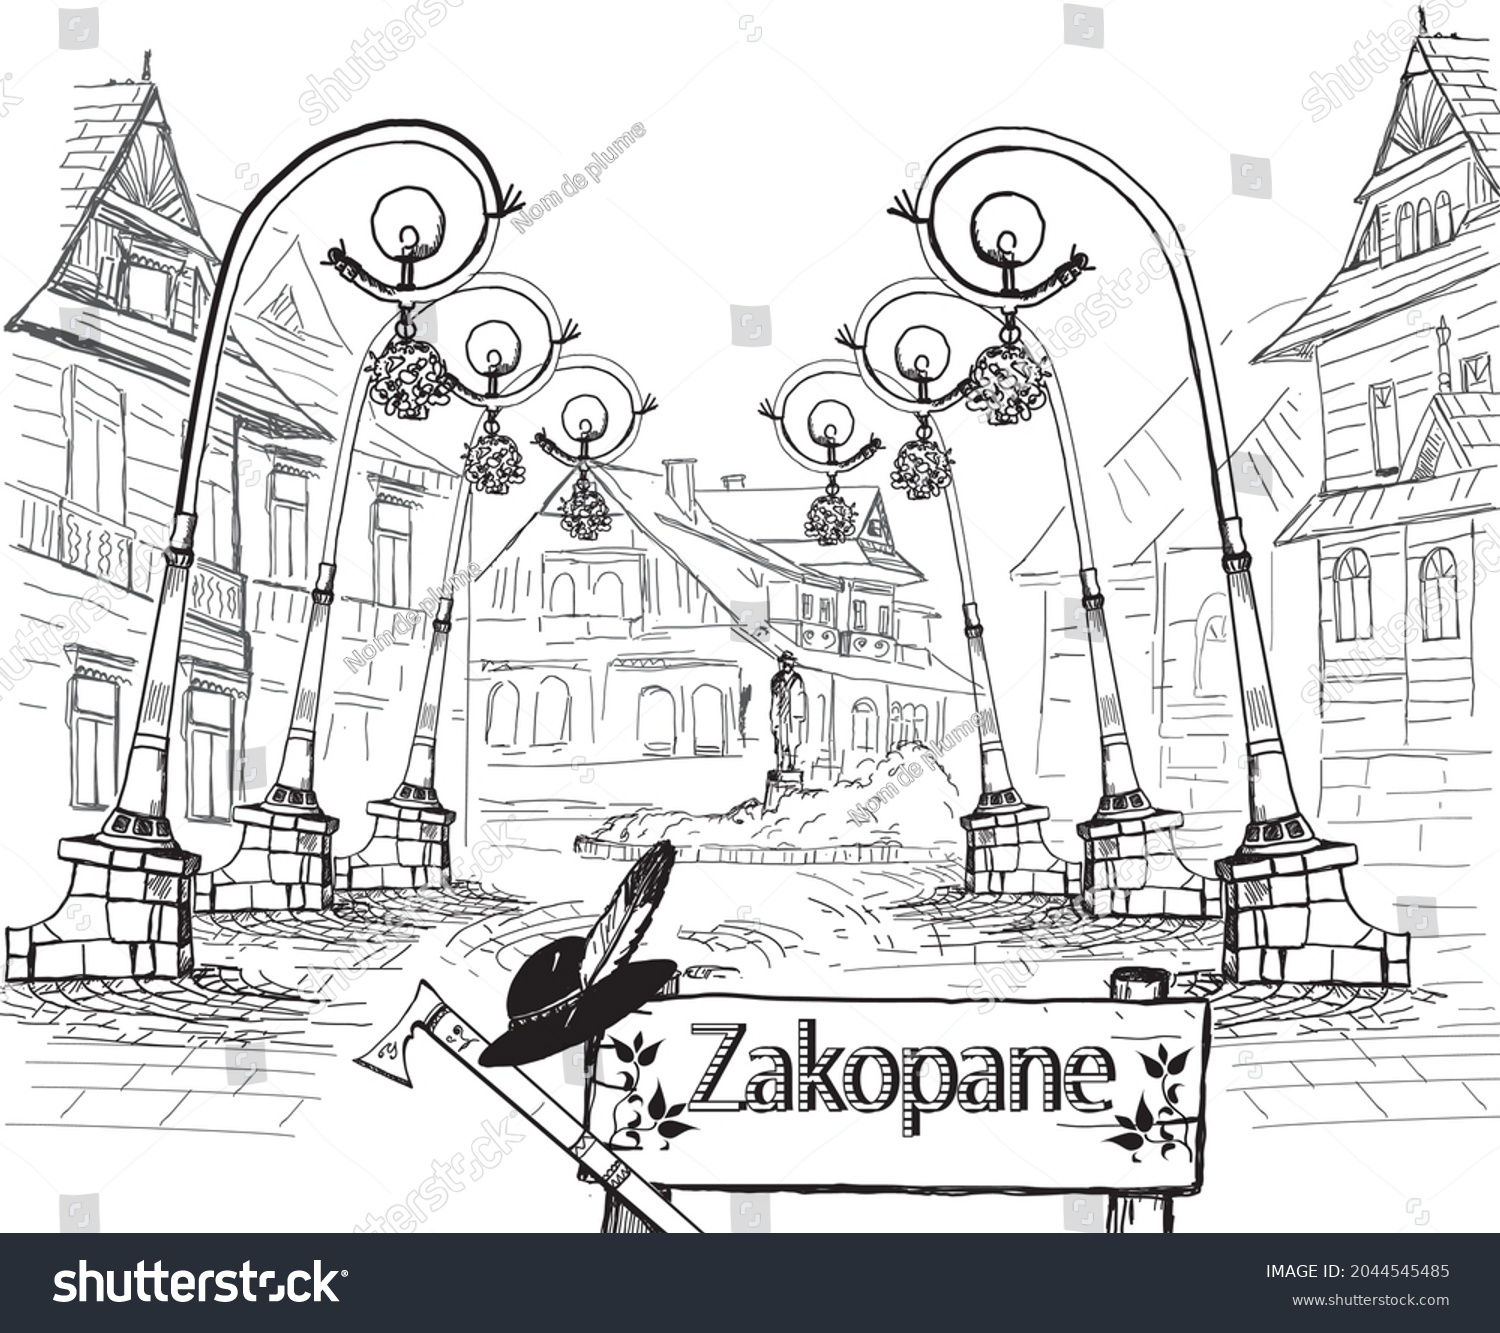 SVG of 
Historic street - promenade located in the center of the popular city of Zakopane. Black and white, sketchy graphics. svg